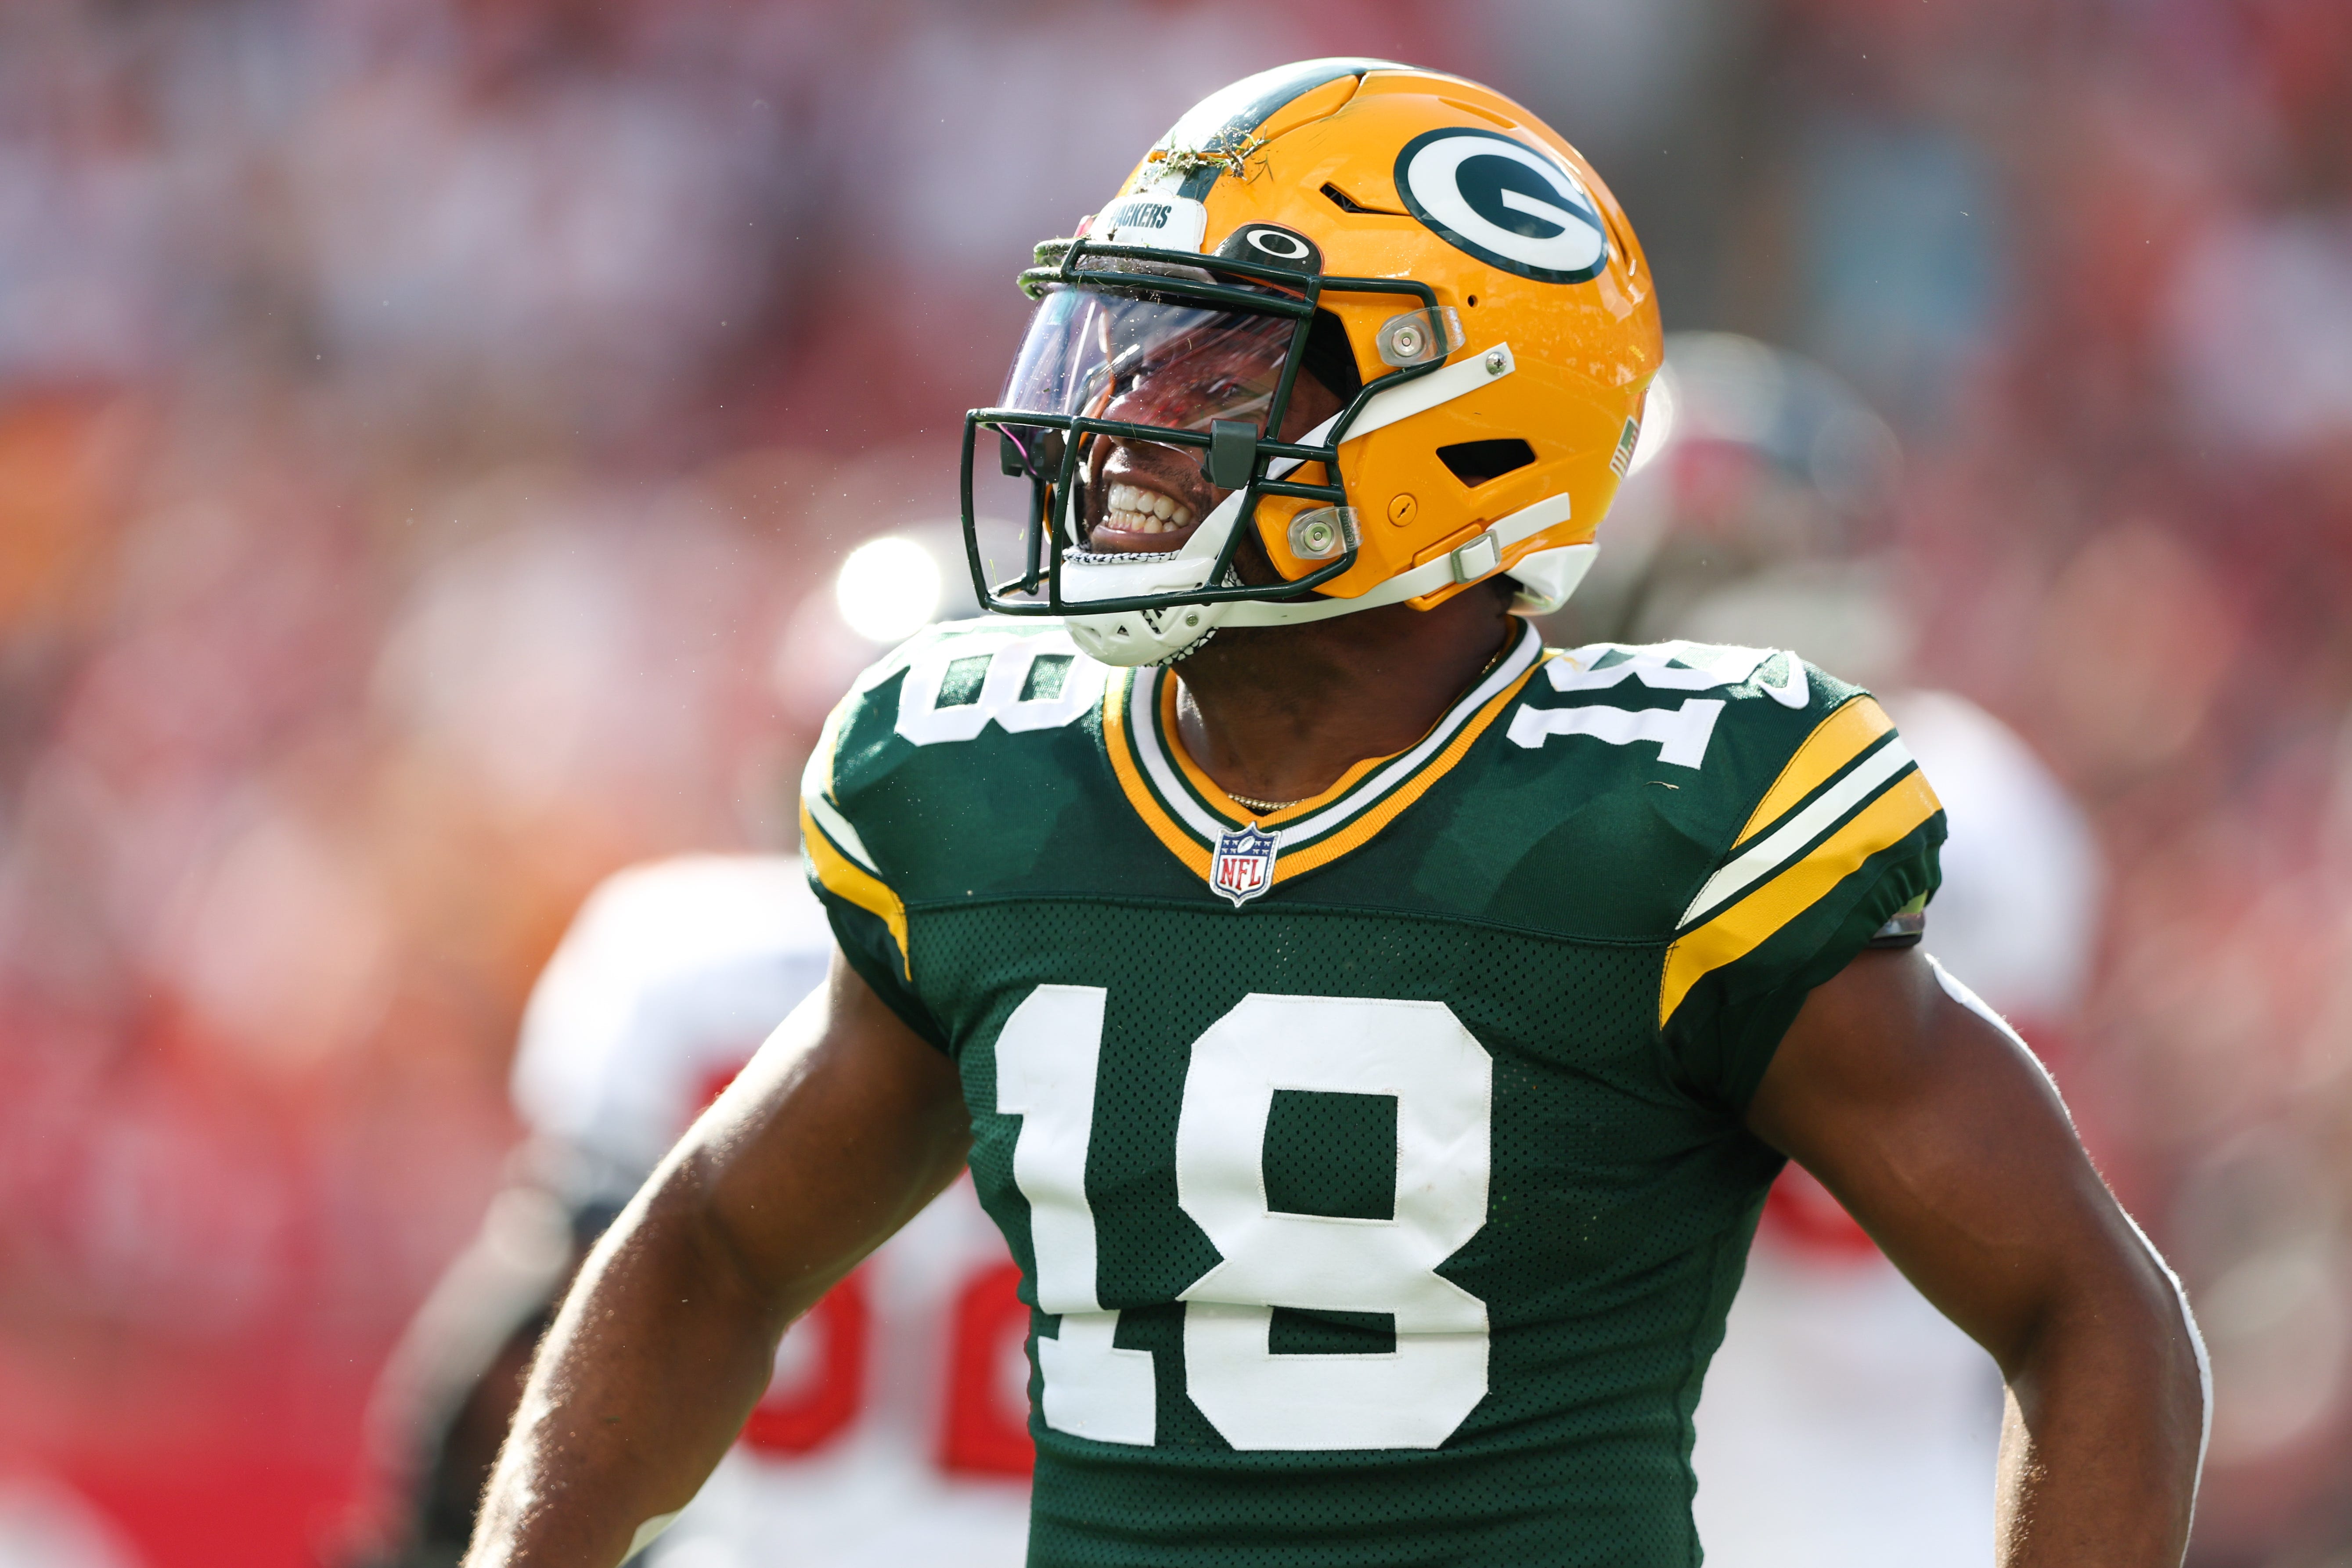 Green Bay Packers wide receiver Randall Cobb (18) reacts after a run against the Tampa Bay Buccaneers in the first quarter on Sept. 25, 2022, at Raymond James Stadium in Tampa, Florida.